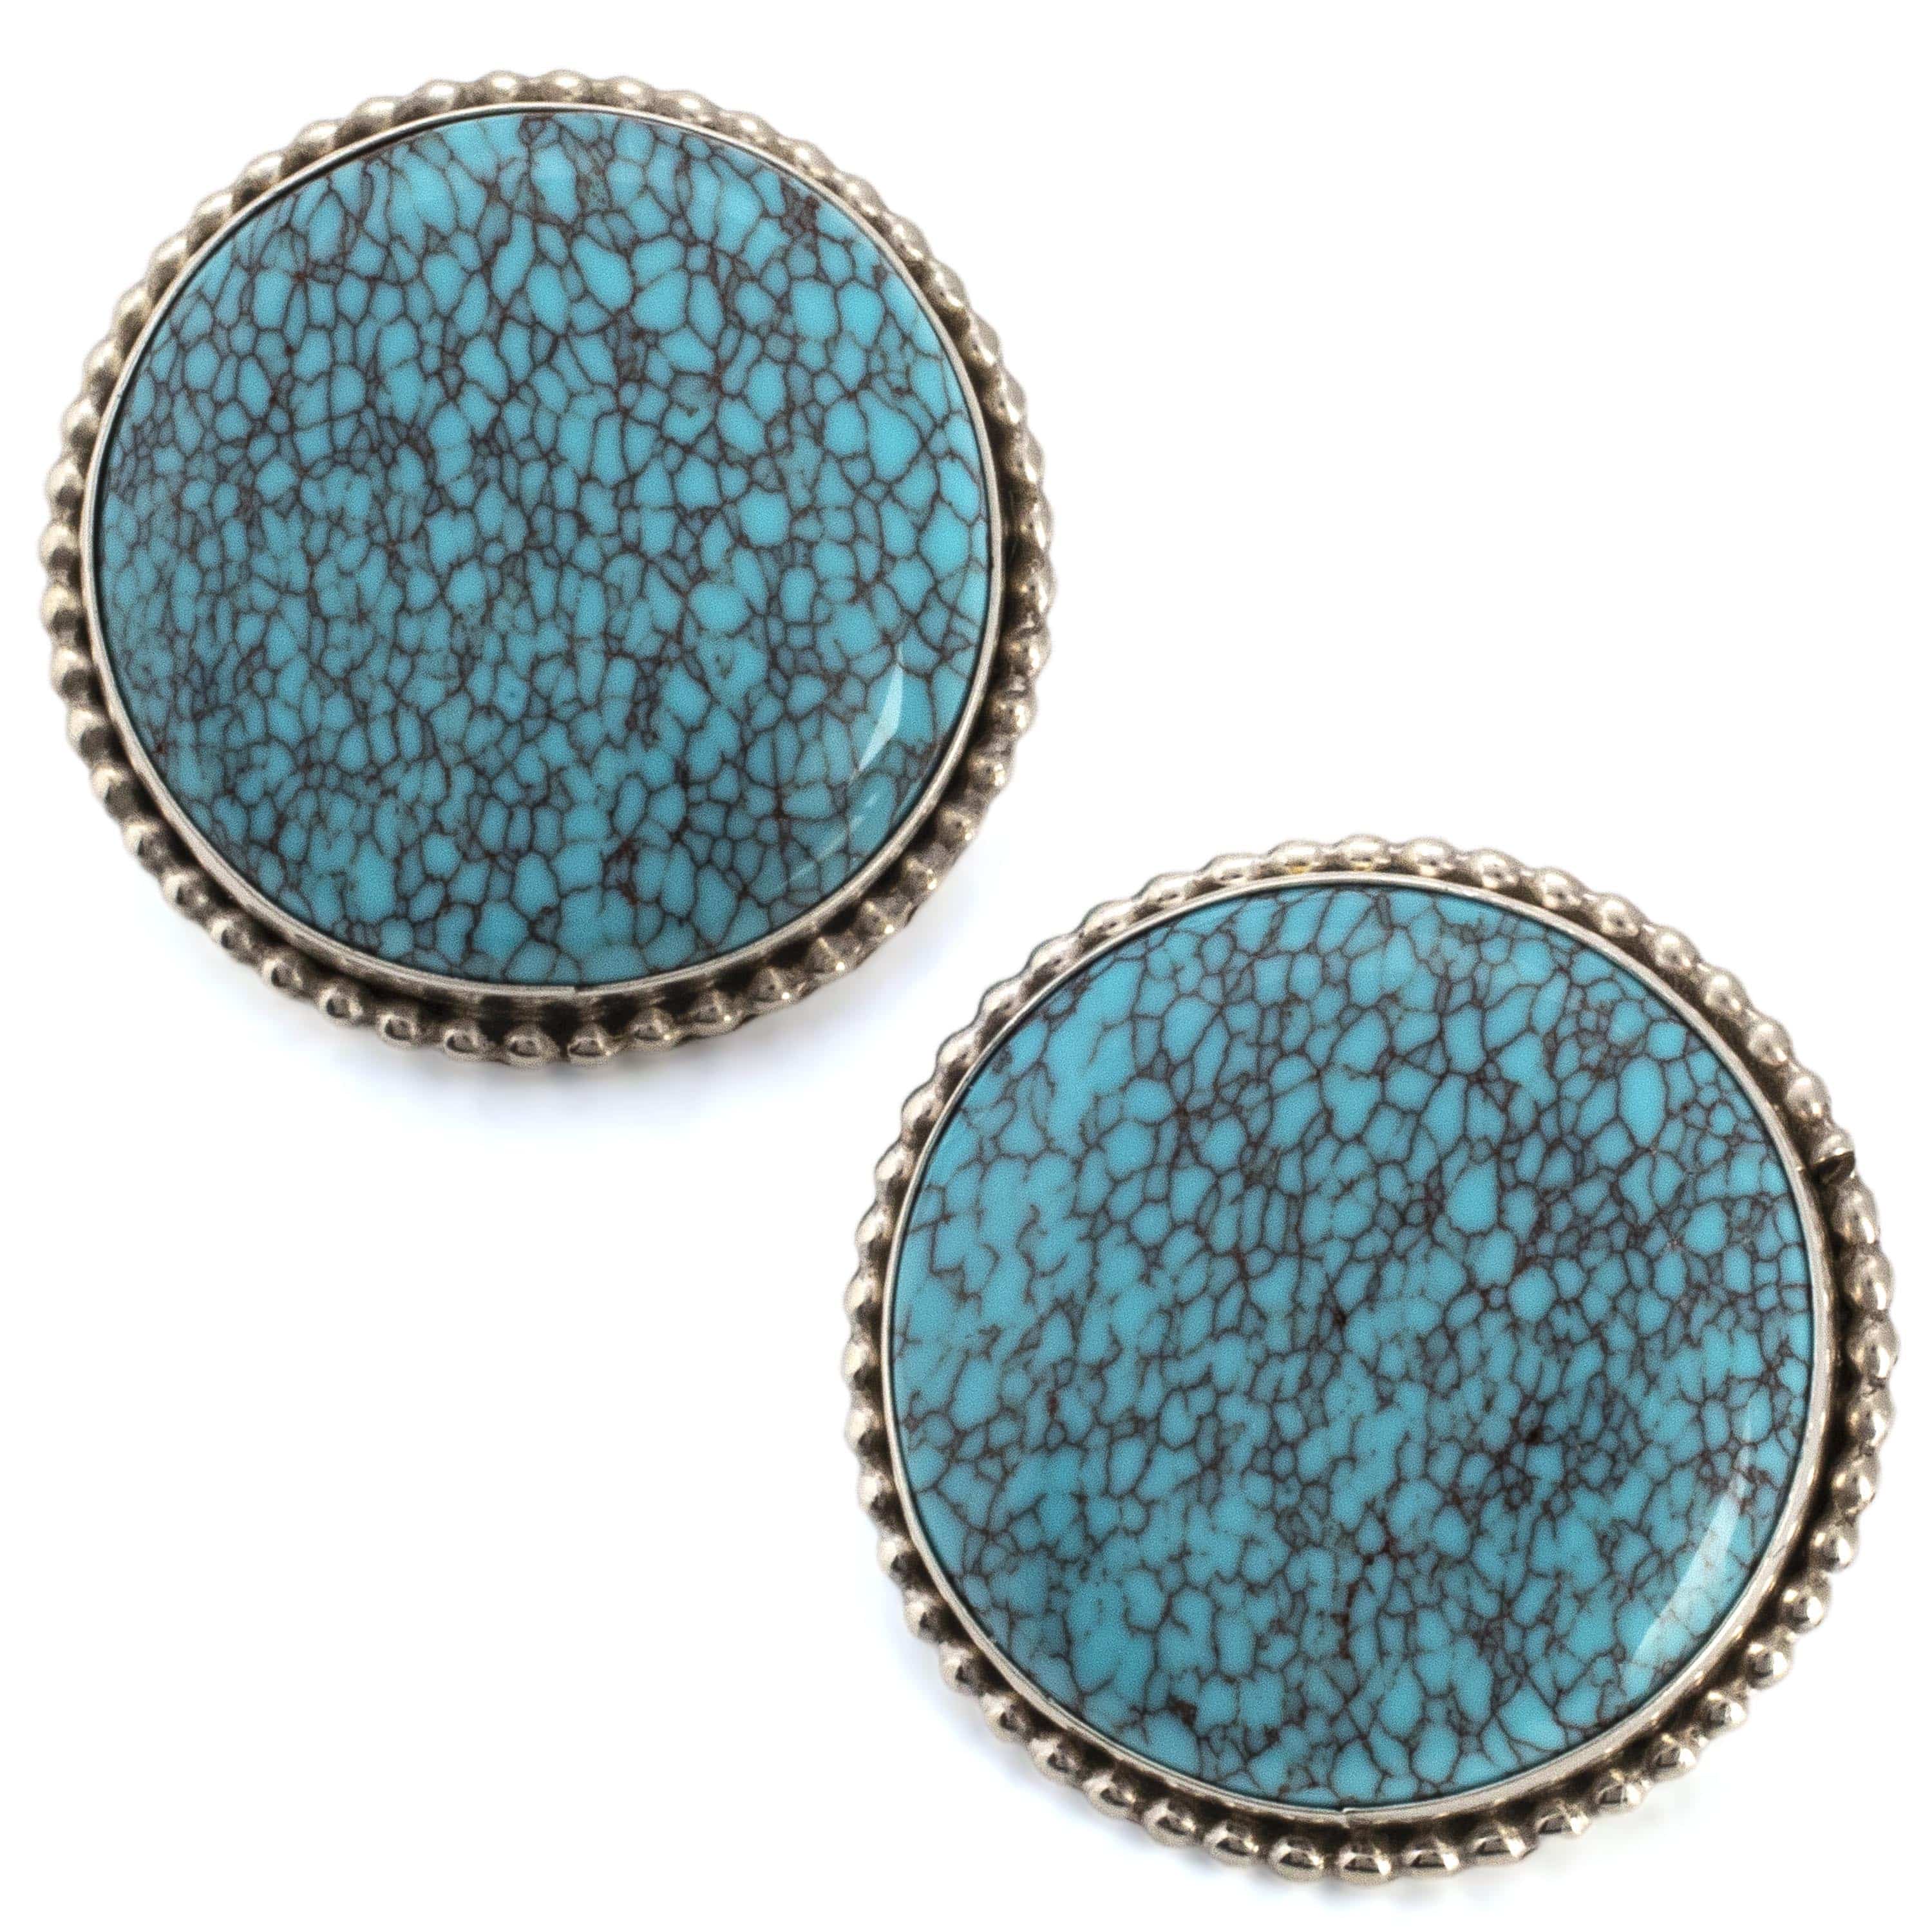 Kalifano Native American Jewelry Anderson Parkett Egyptian Turquoise Circular Navajo USA Native American Made Sterling Silver Earrings NAE900.004